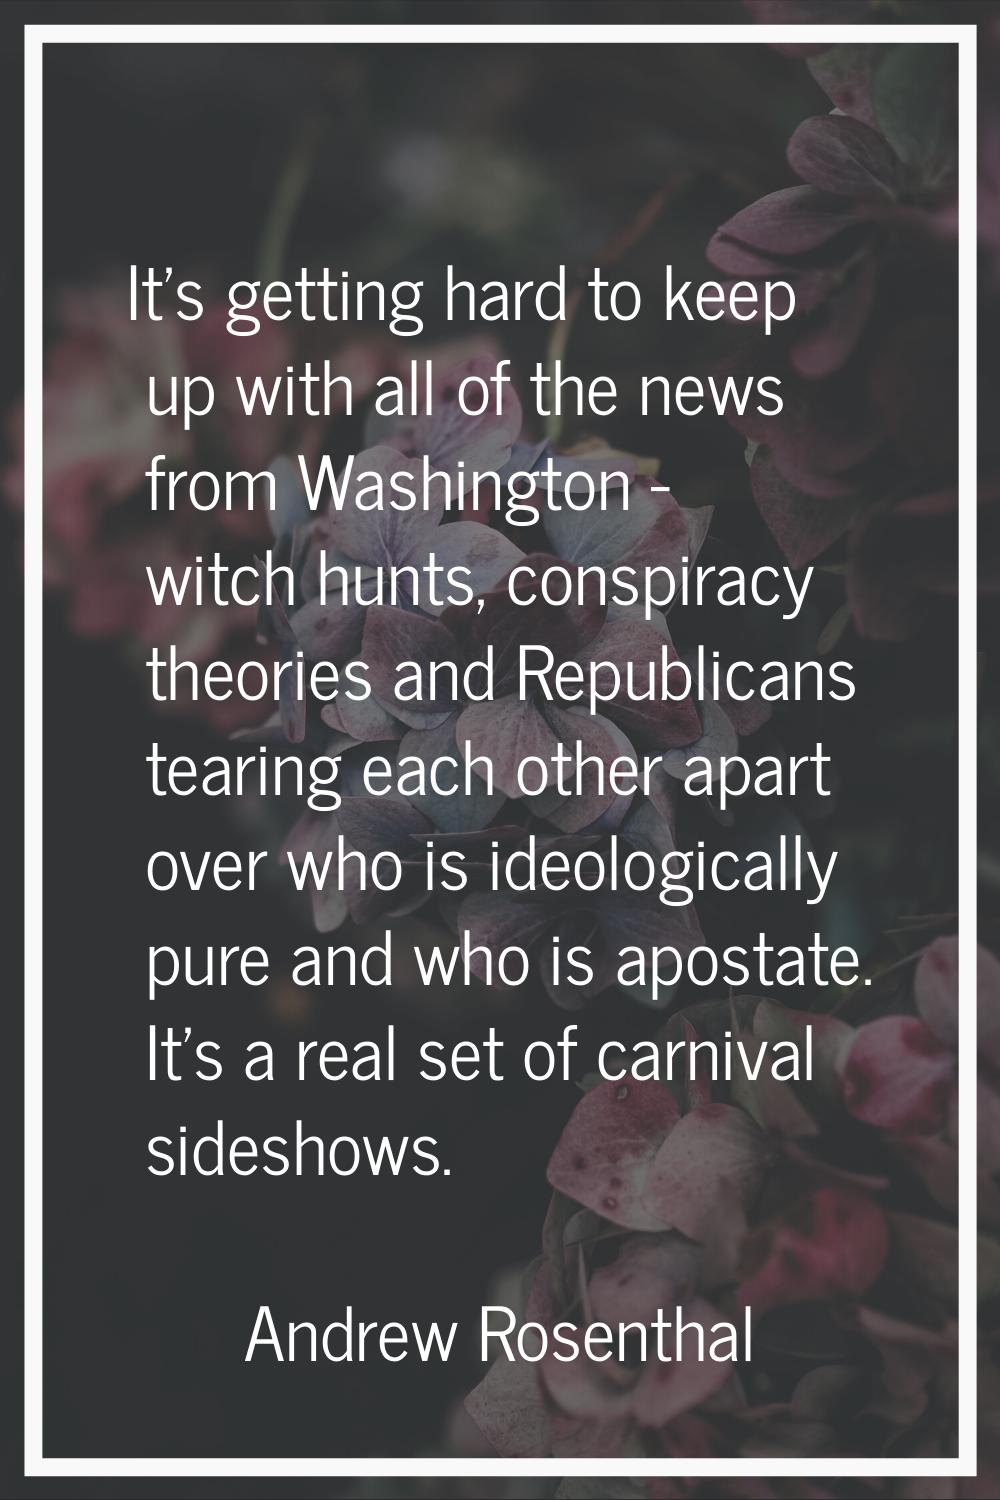 It's getting hard to keep up with all of the news from Washington - witch hunts, conspiracy theorie